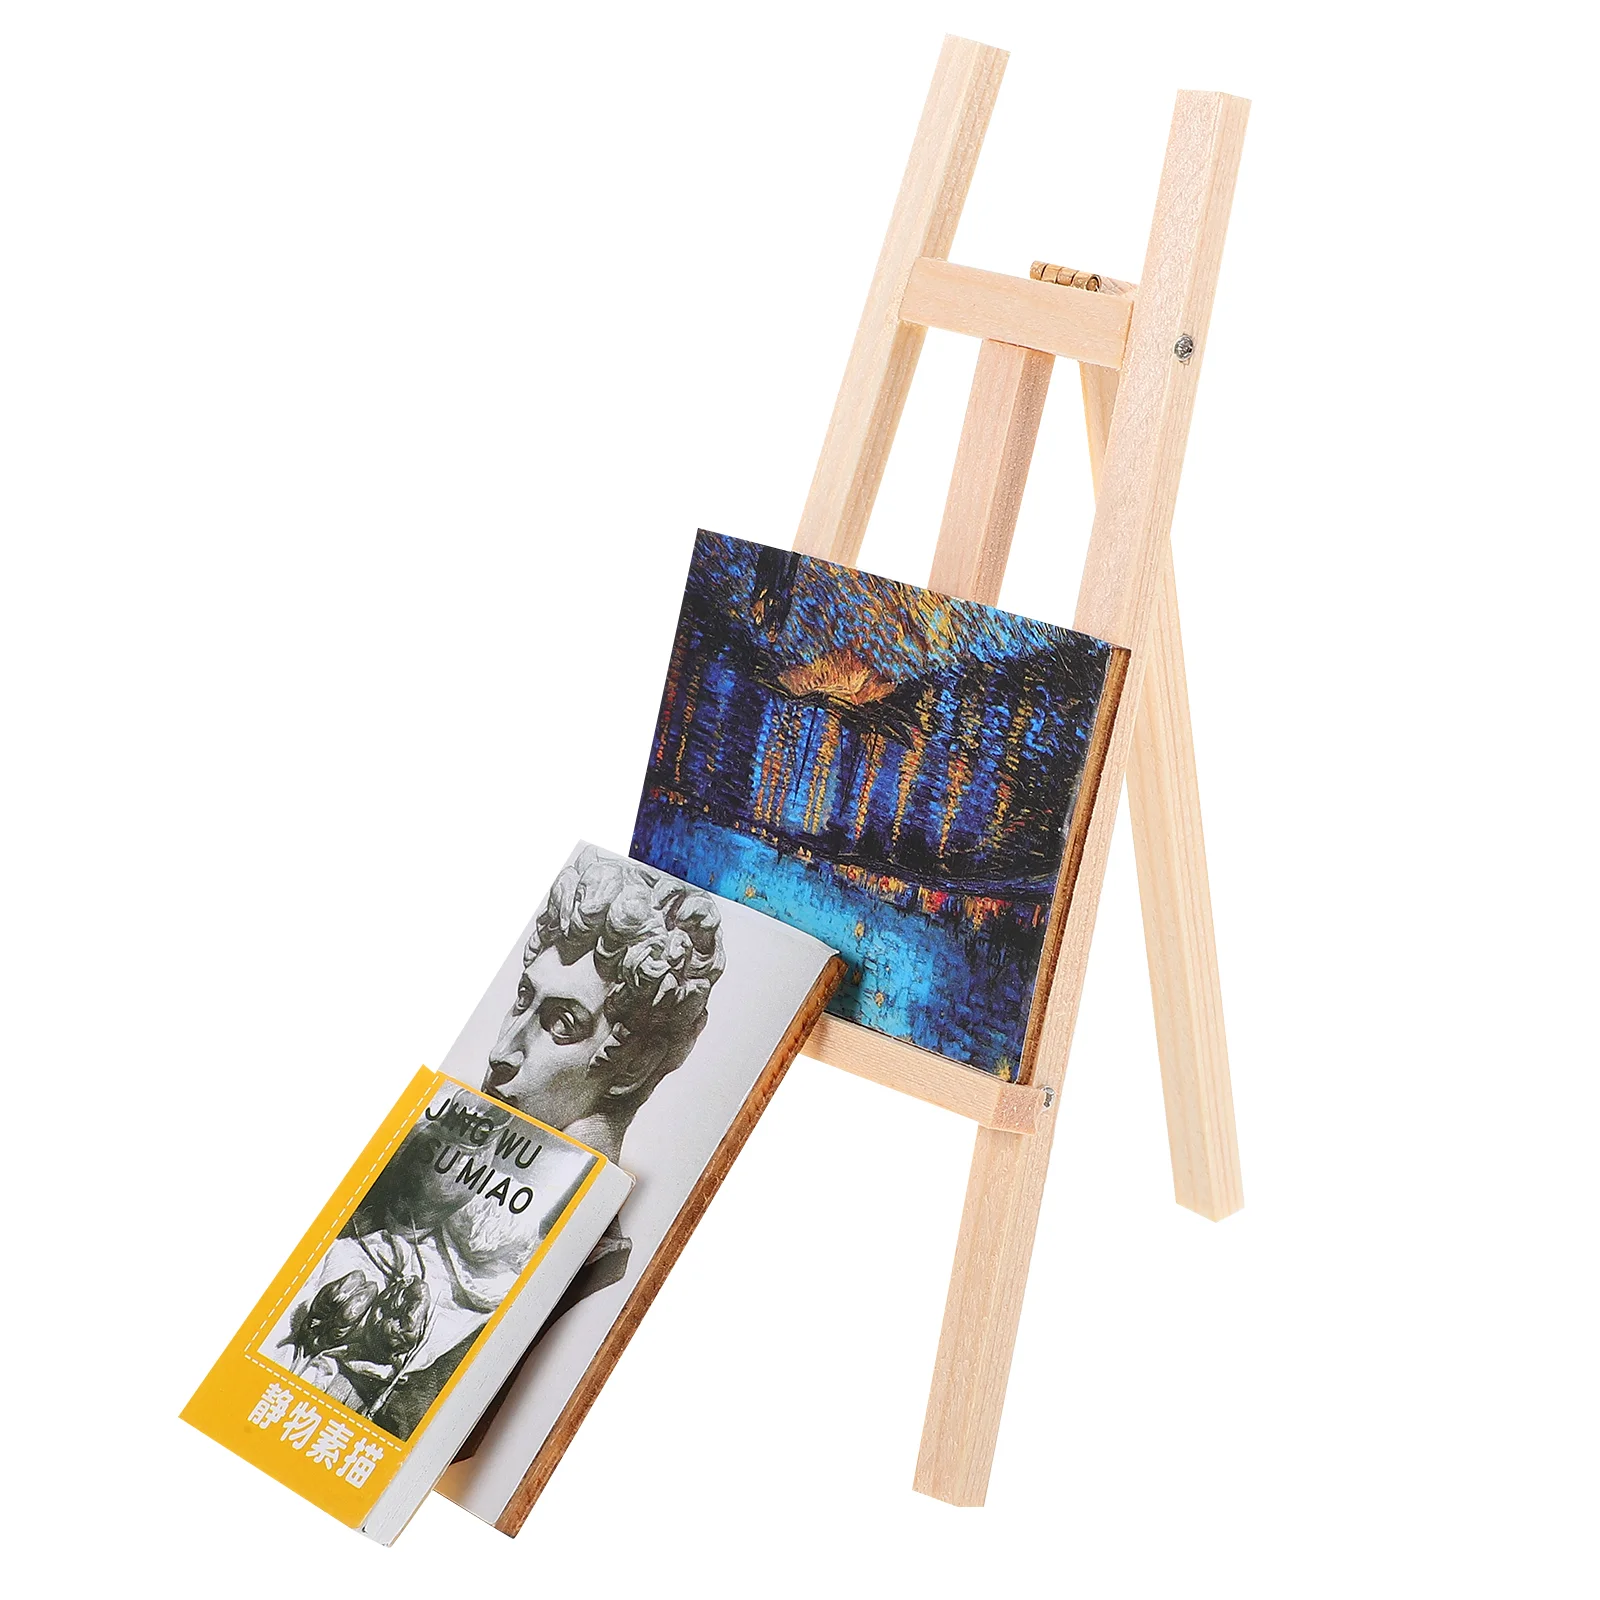 House Decorative Painting Mini Adornment Miniature Easel Wooden Board Furniture Small Model folding easel drawing board adjustable height tabletop painting stand tray desktop tripod sketching display rack outdoors